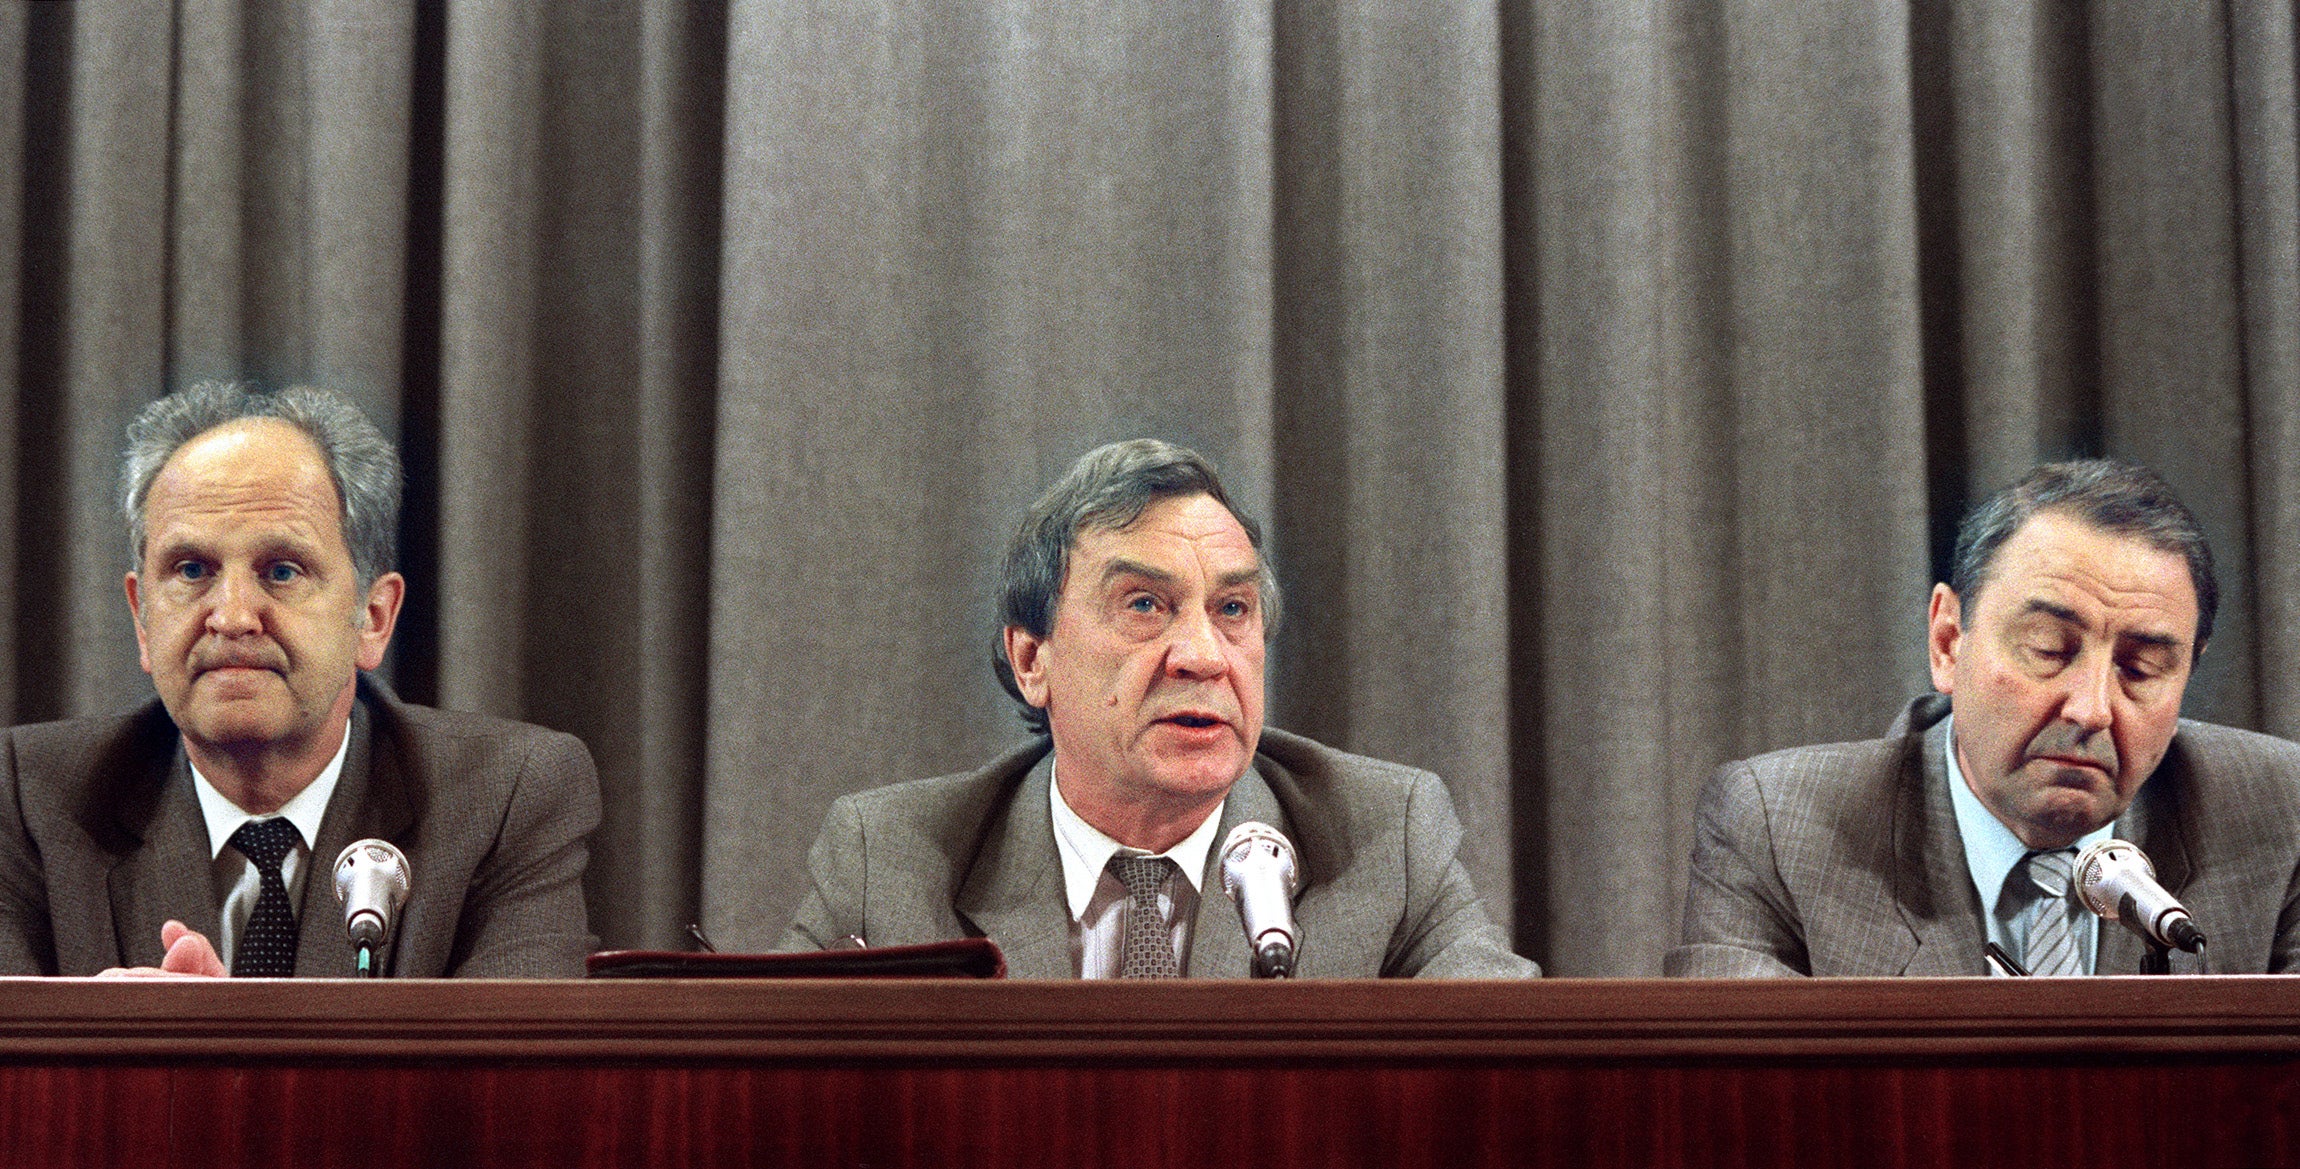 From left: Soviet interior minister Boris Pugo, Soviet vice-president Gennady Yanayev, and Oleg Baklanov, the first vice-president of the Soviet Defence Council, the members of the self-styled ‘committee for the state of emergency’, which headed the coup, in a press conference on 19 August 1991 in Moscow